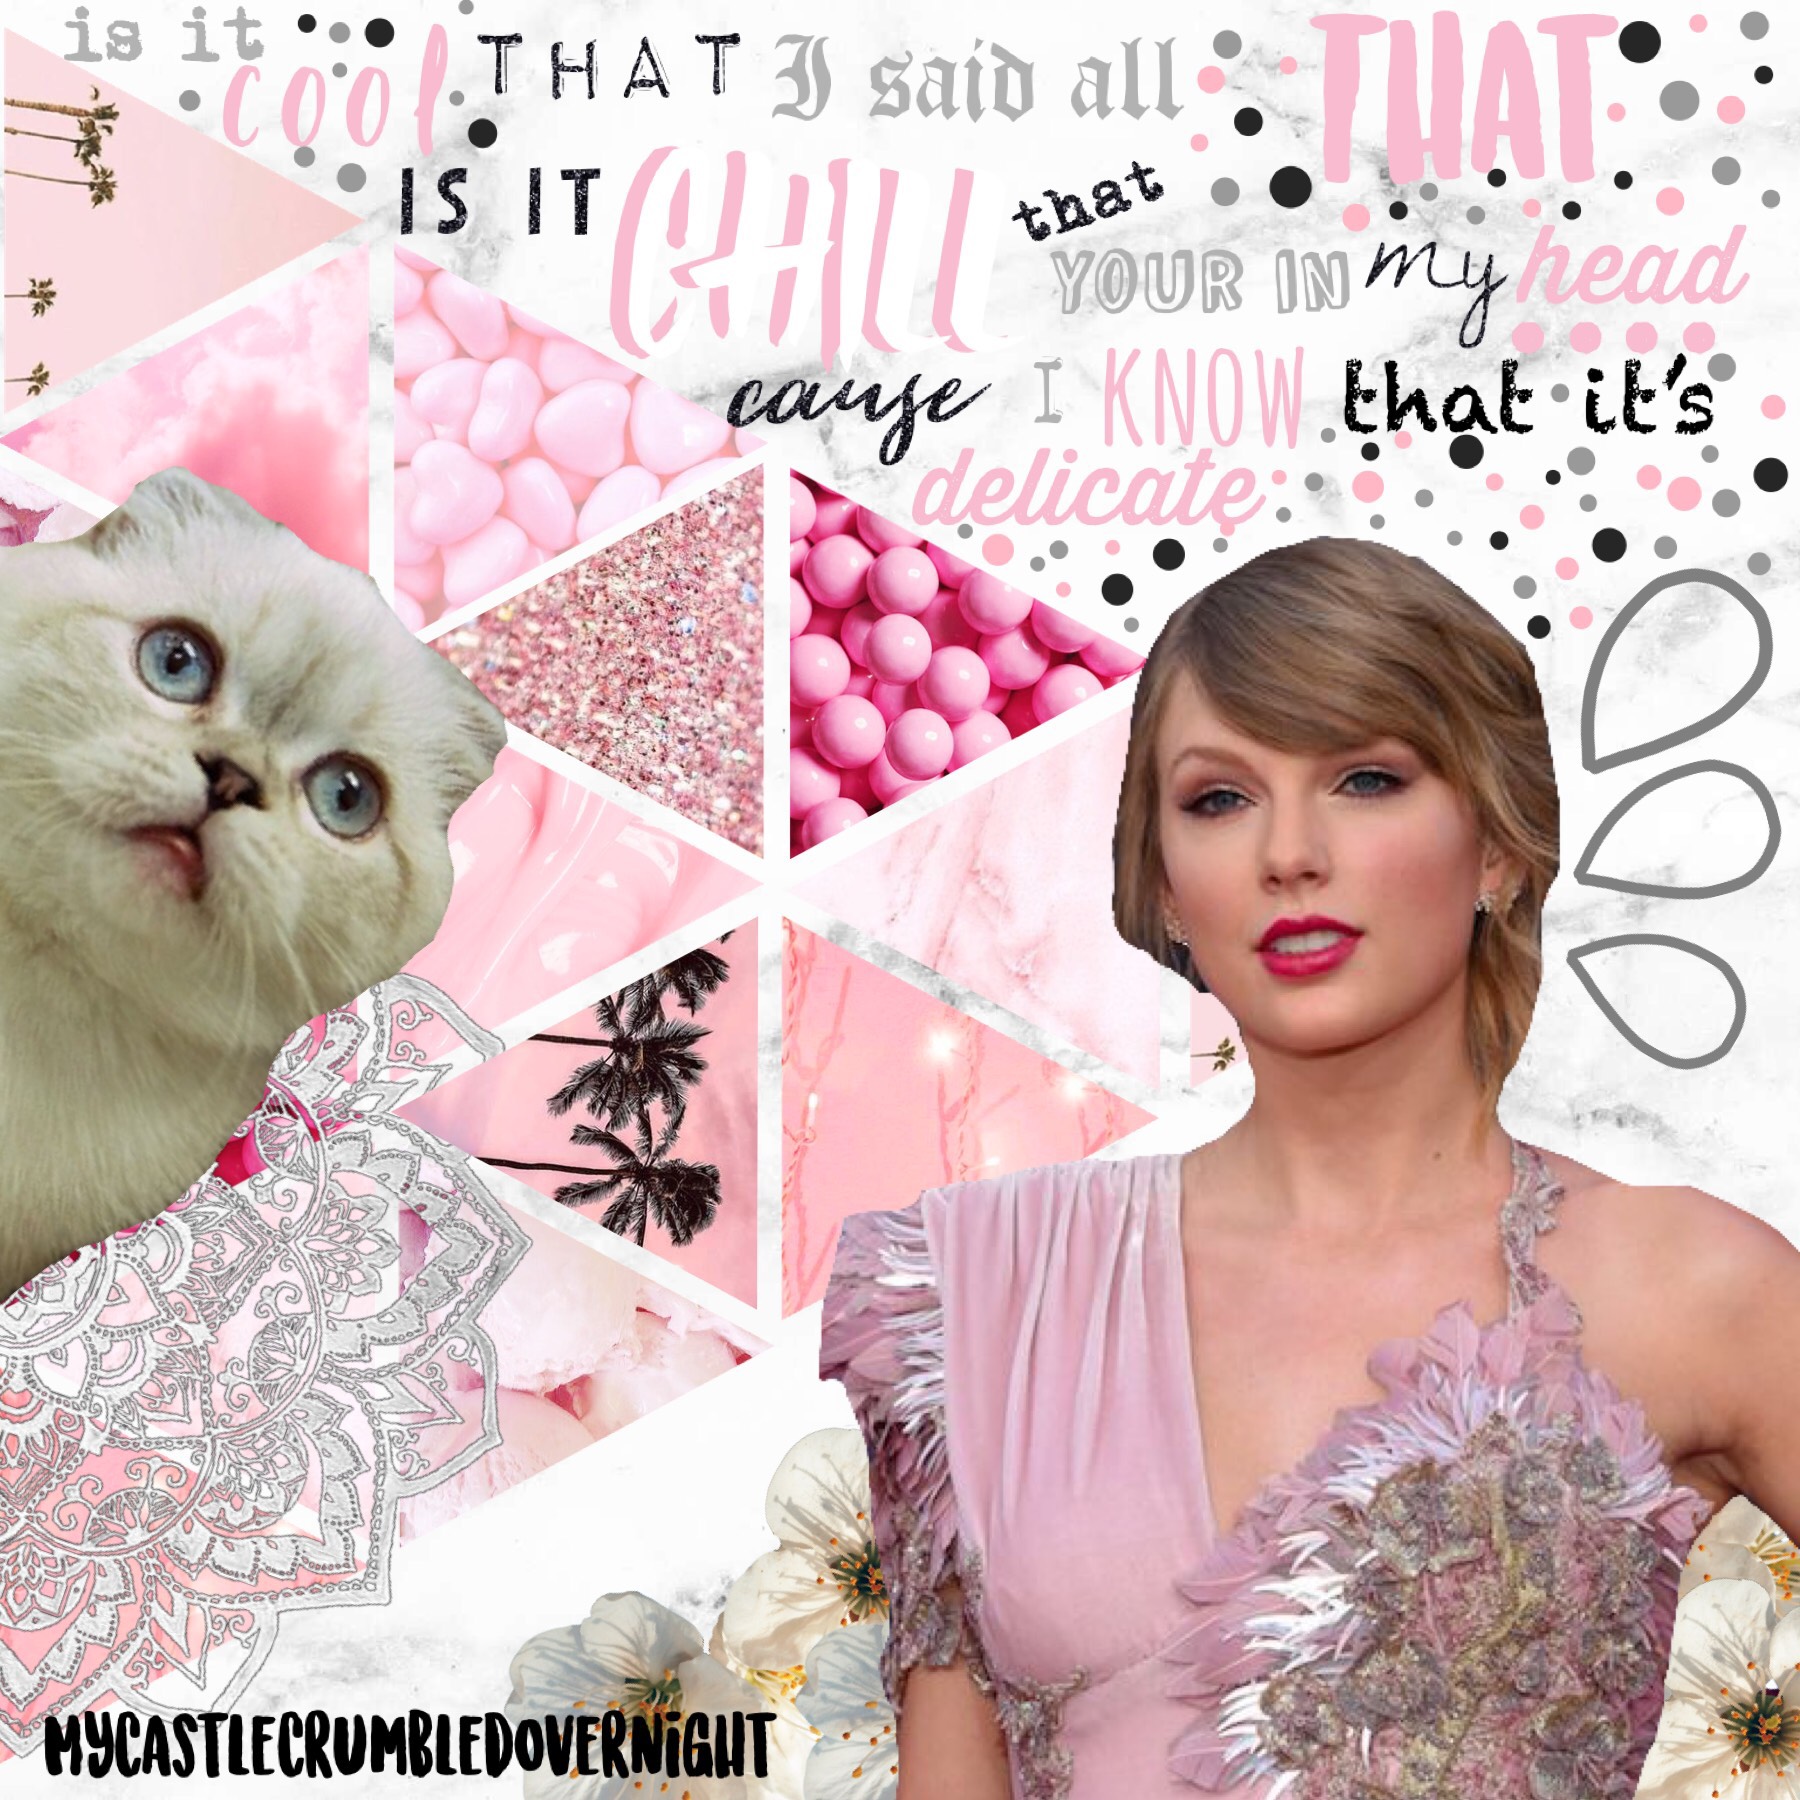 Tap 💕
new style inspired by EverythingSwift
QOTD: Meredith or Olivia?
AOTD: Olivia 